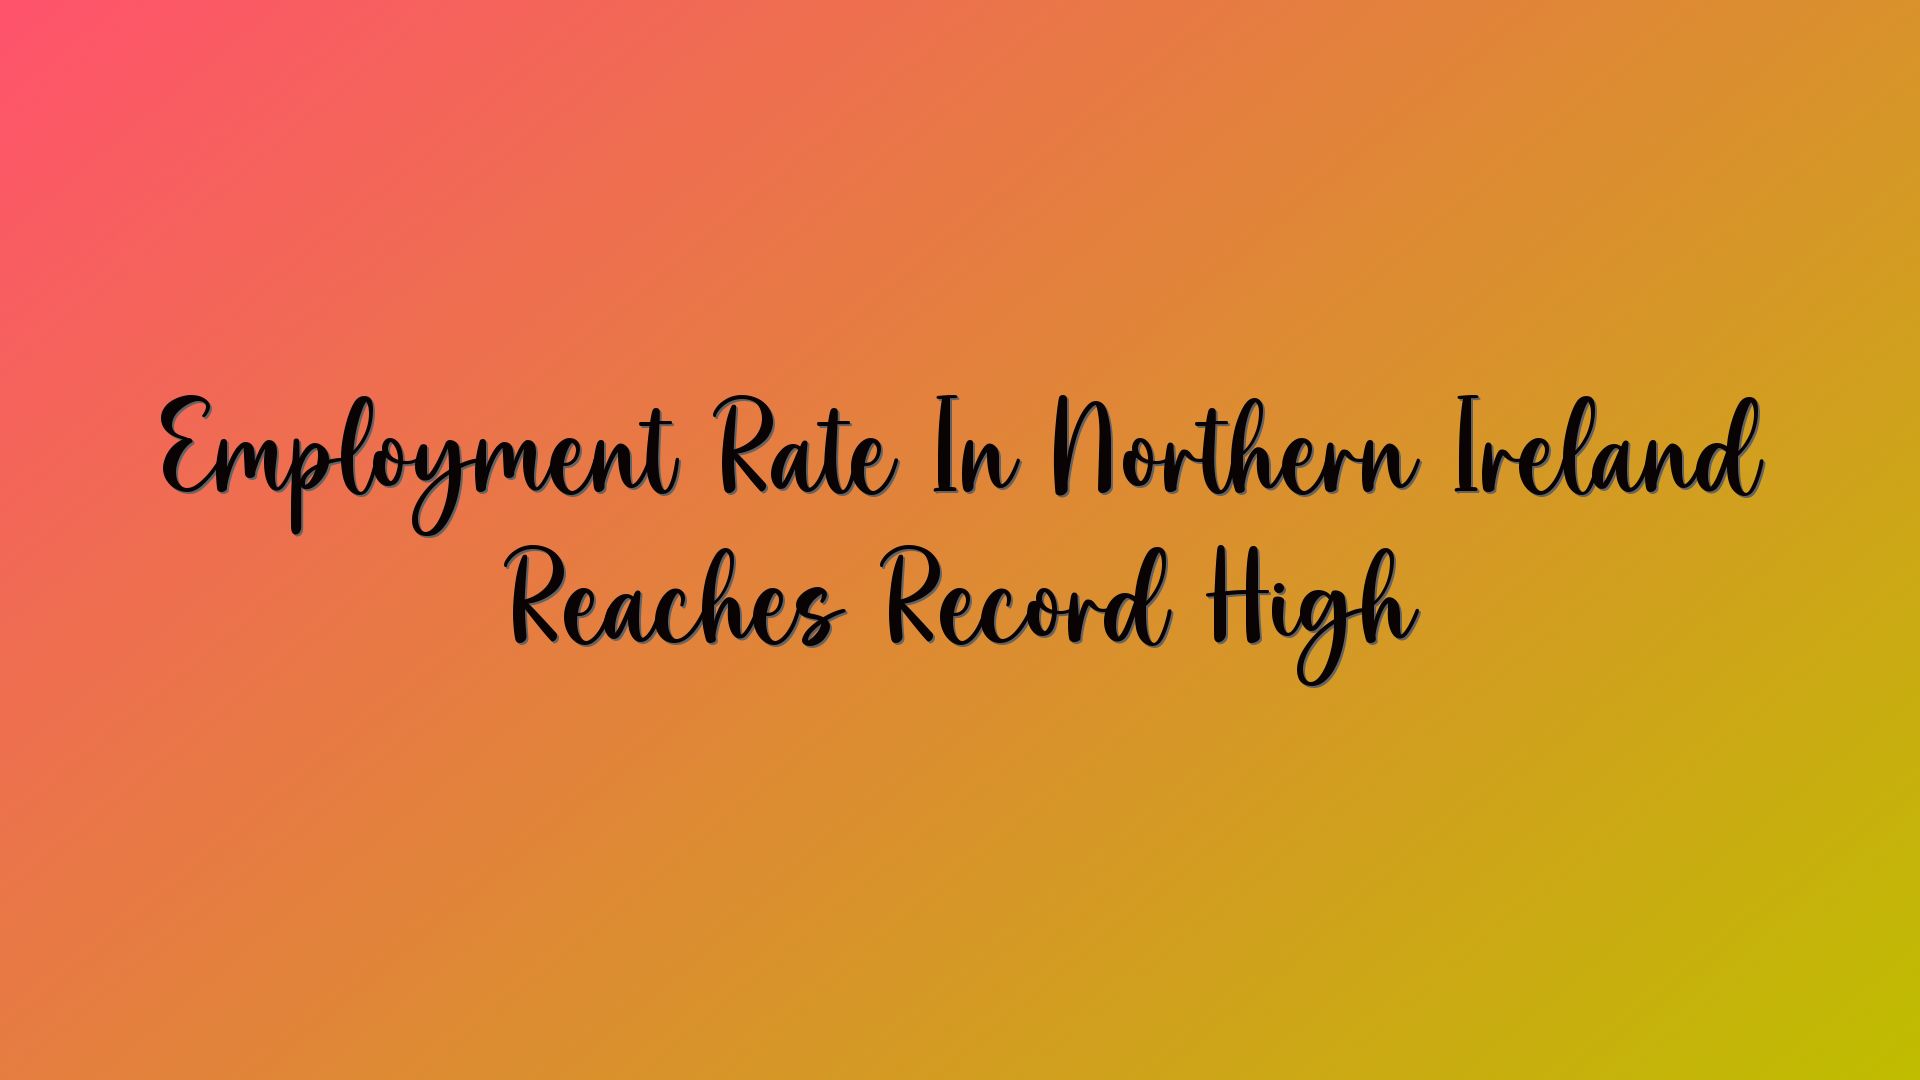 Employment Rate In Northern Ireland Reaches Record High